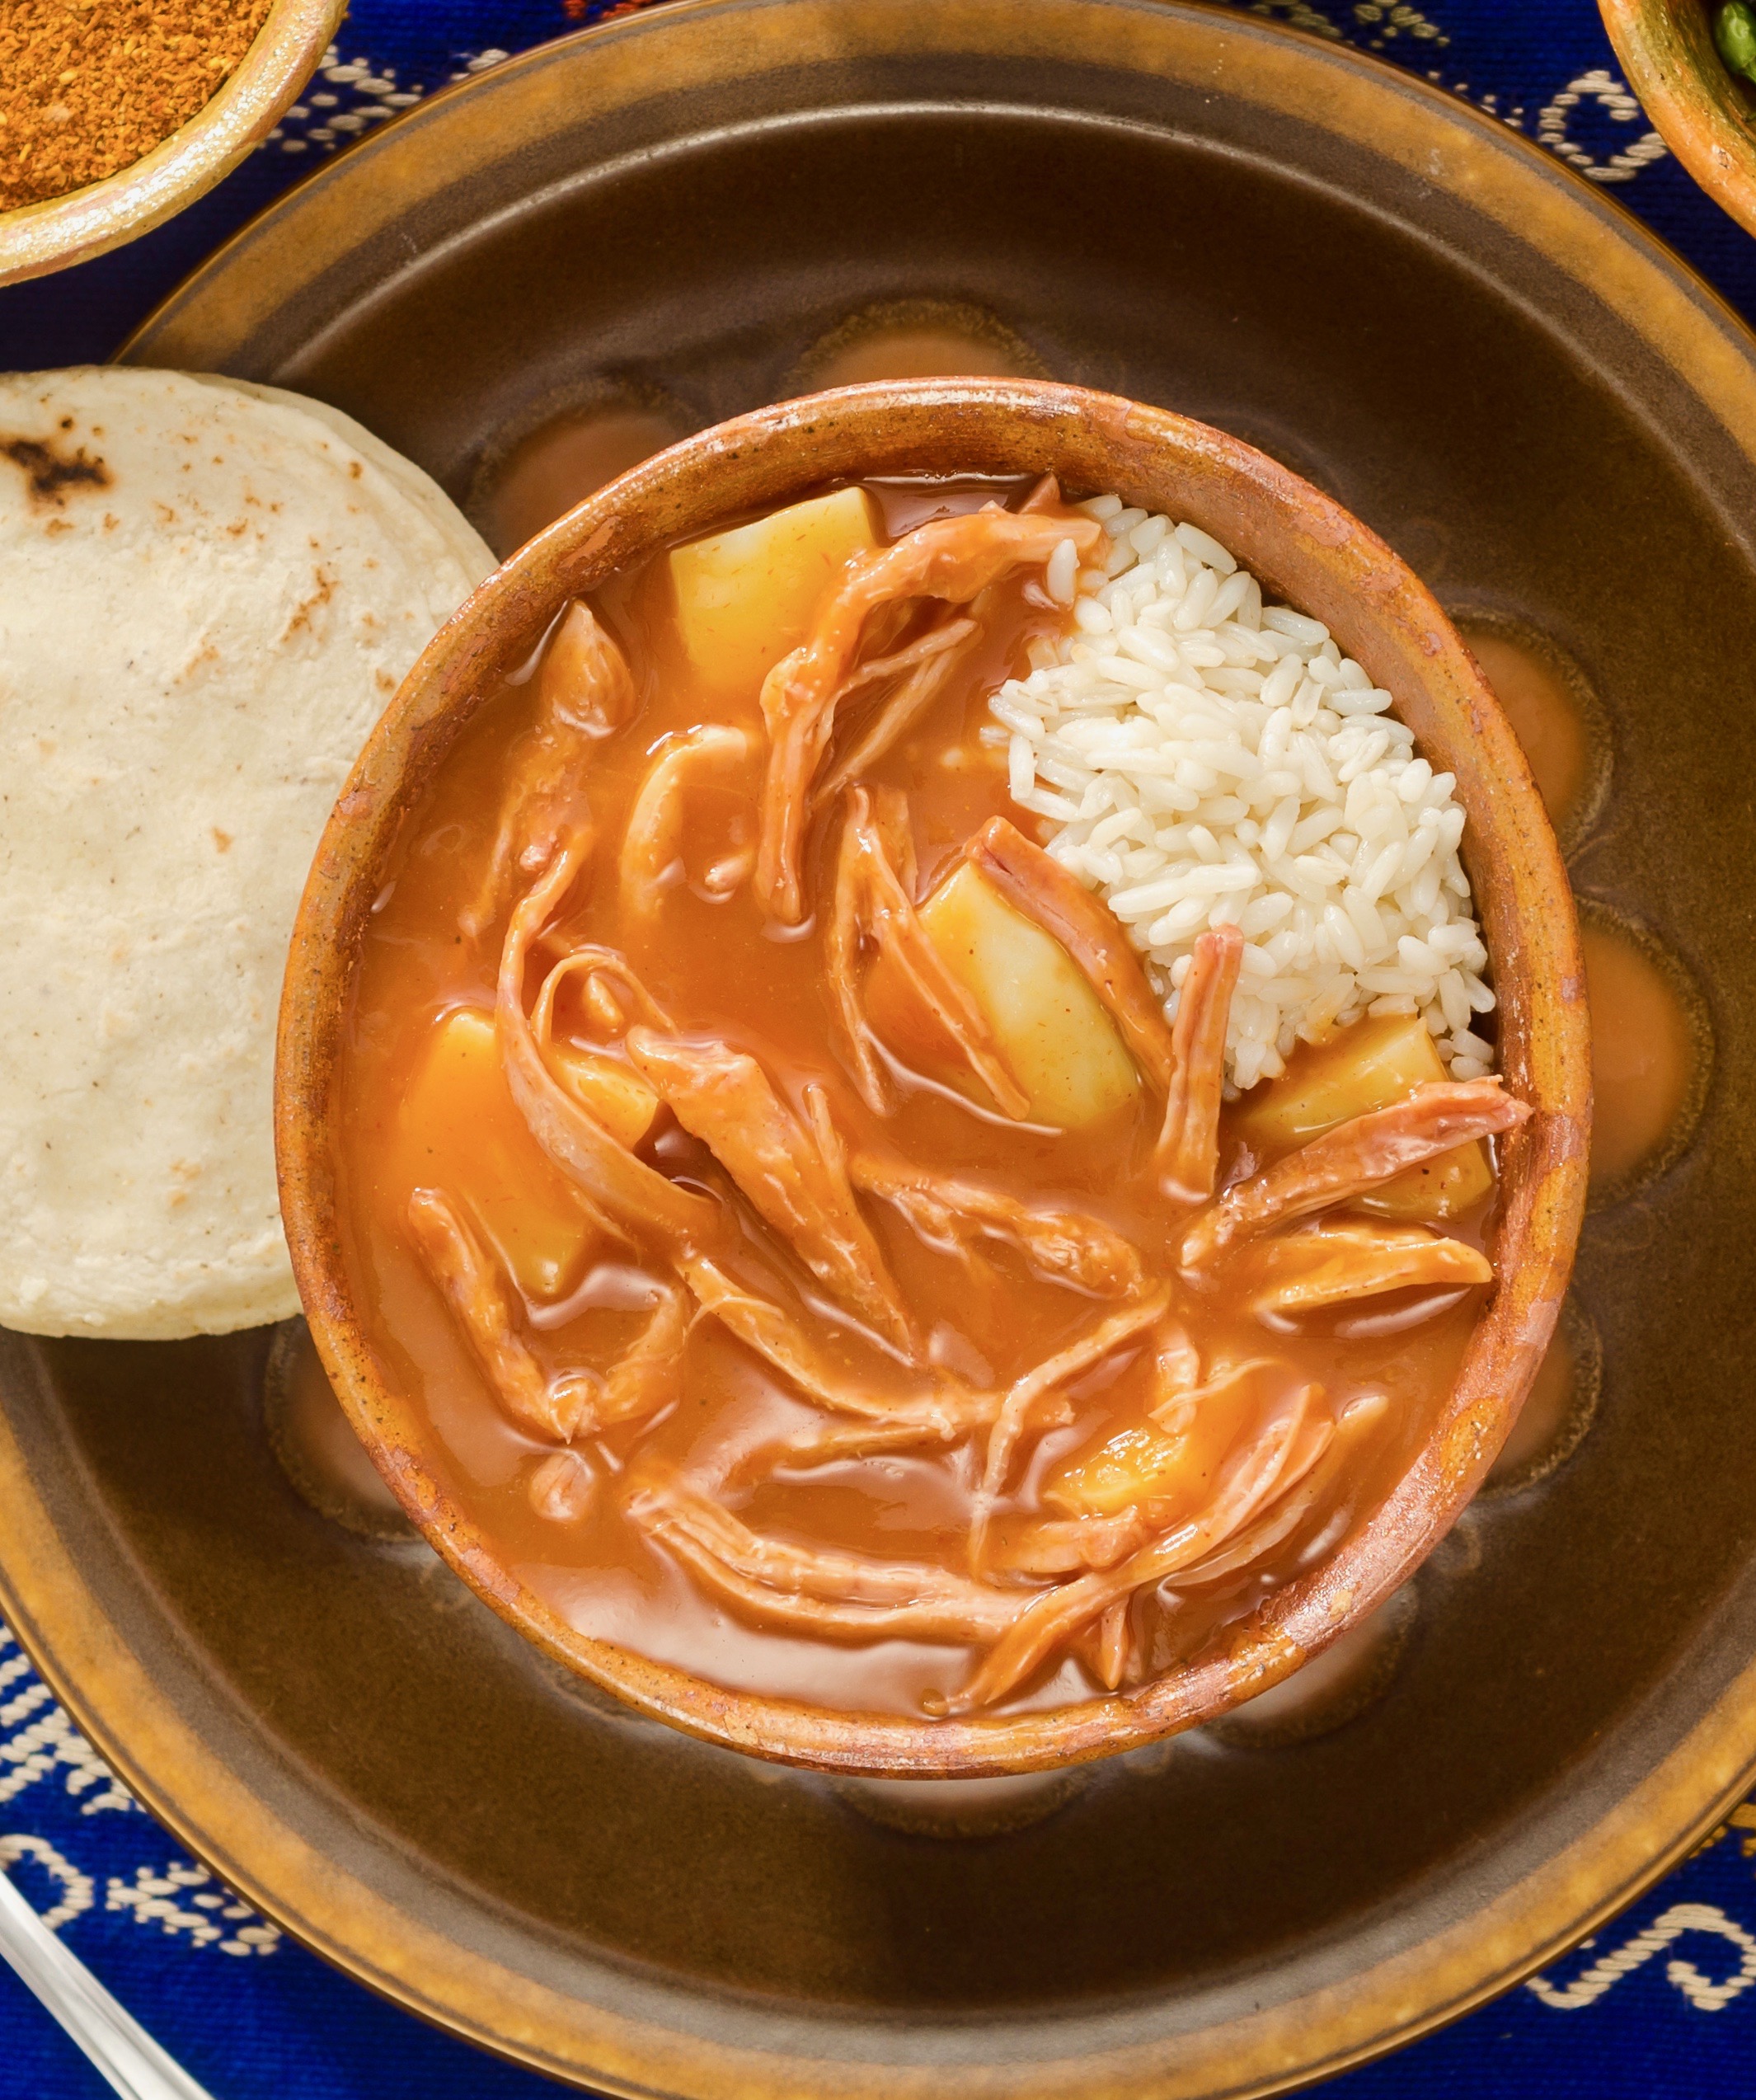 (Hilachas) traditional dish of Guatemalan cuisine, rice, potatoes, tomato sauce and tortillas.